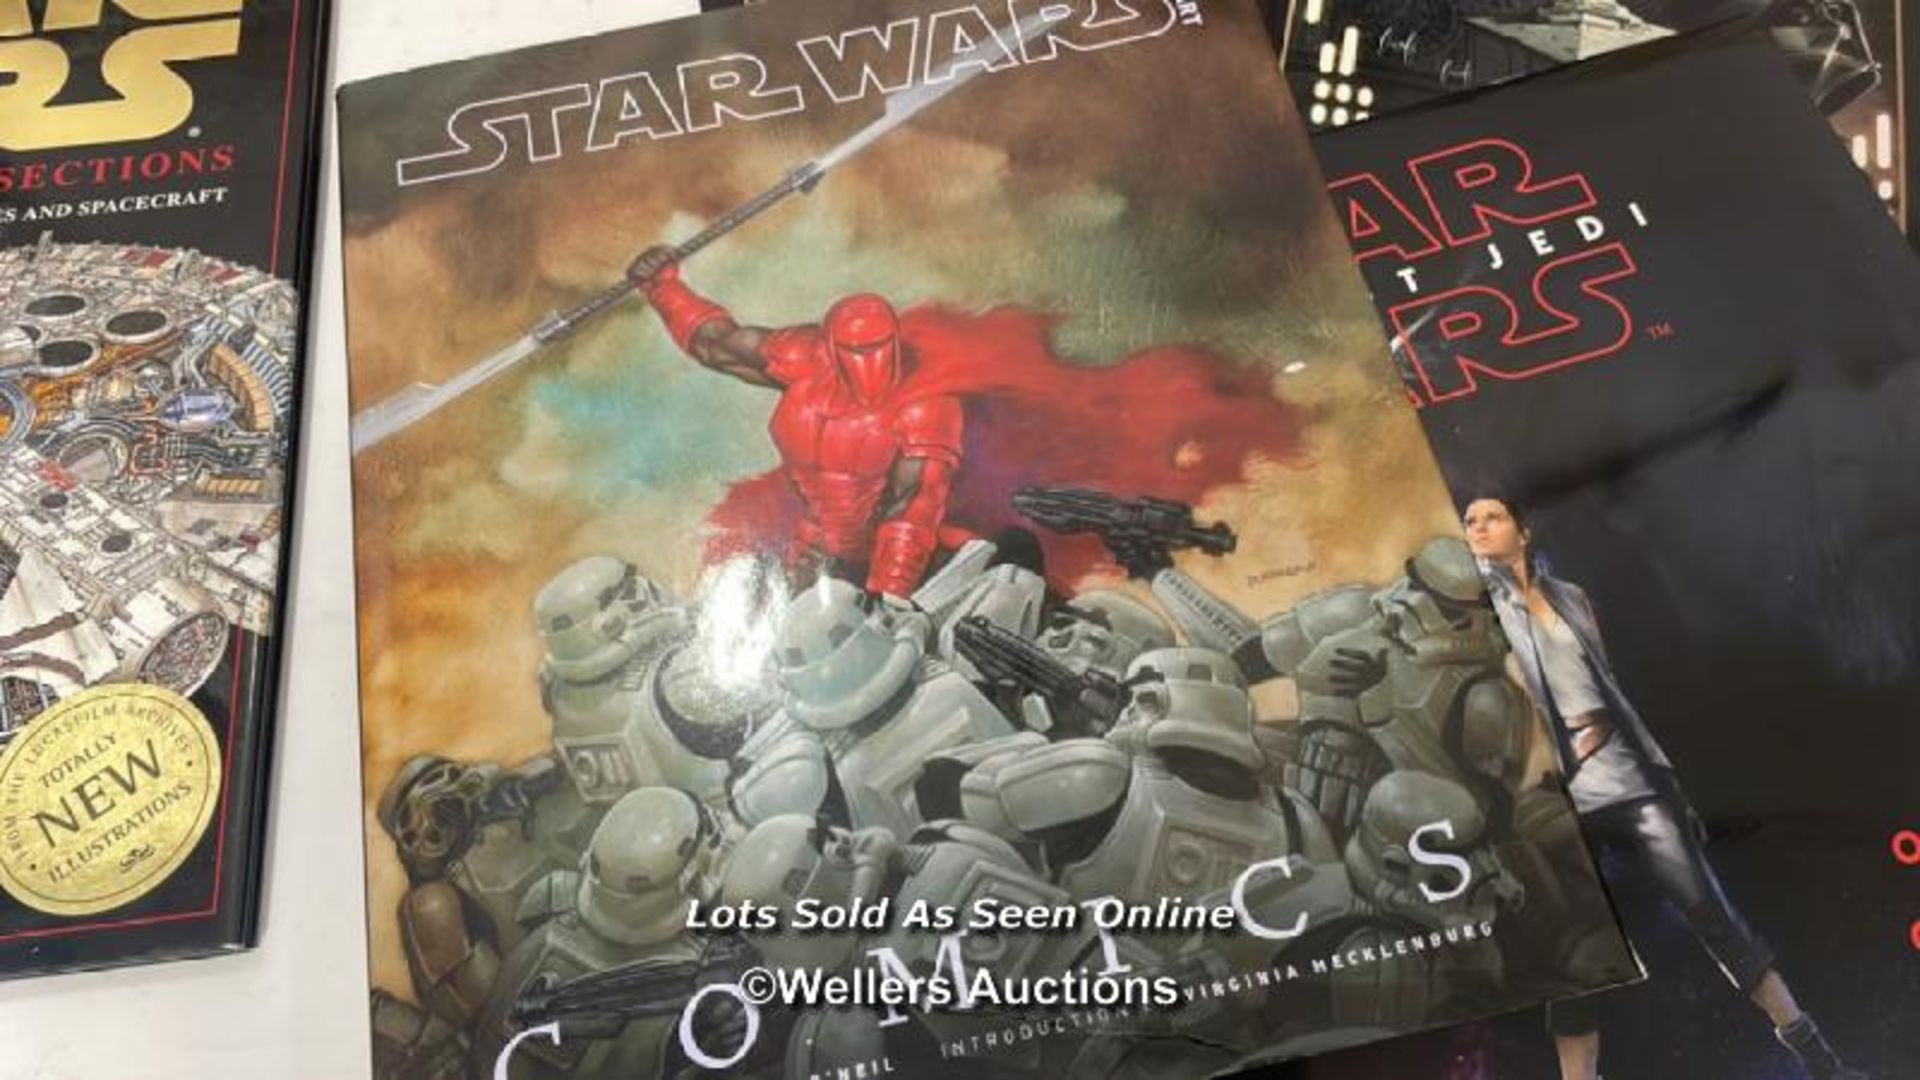 Star Wars books, annuals and calender including Star Wars Comics Art - Image 2 of 7